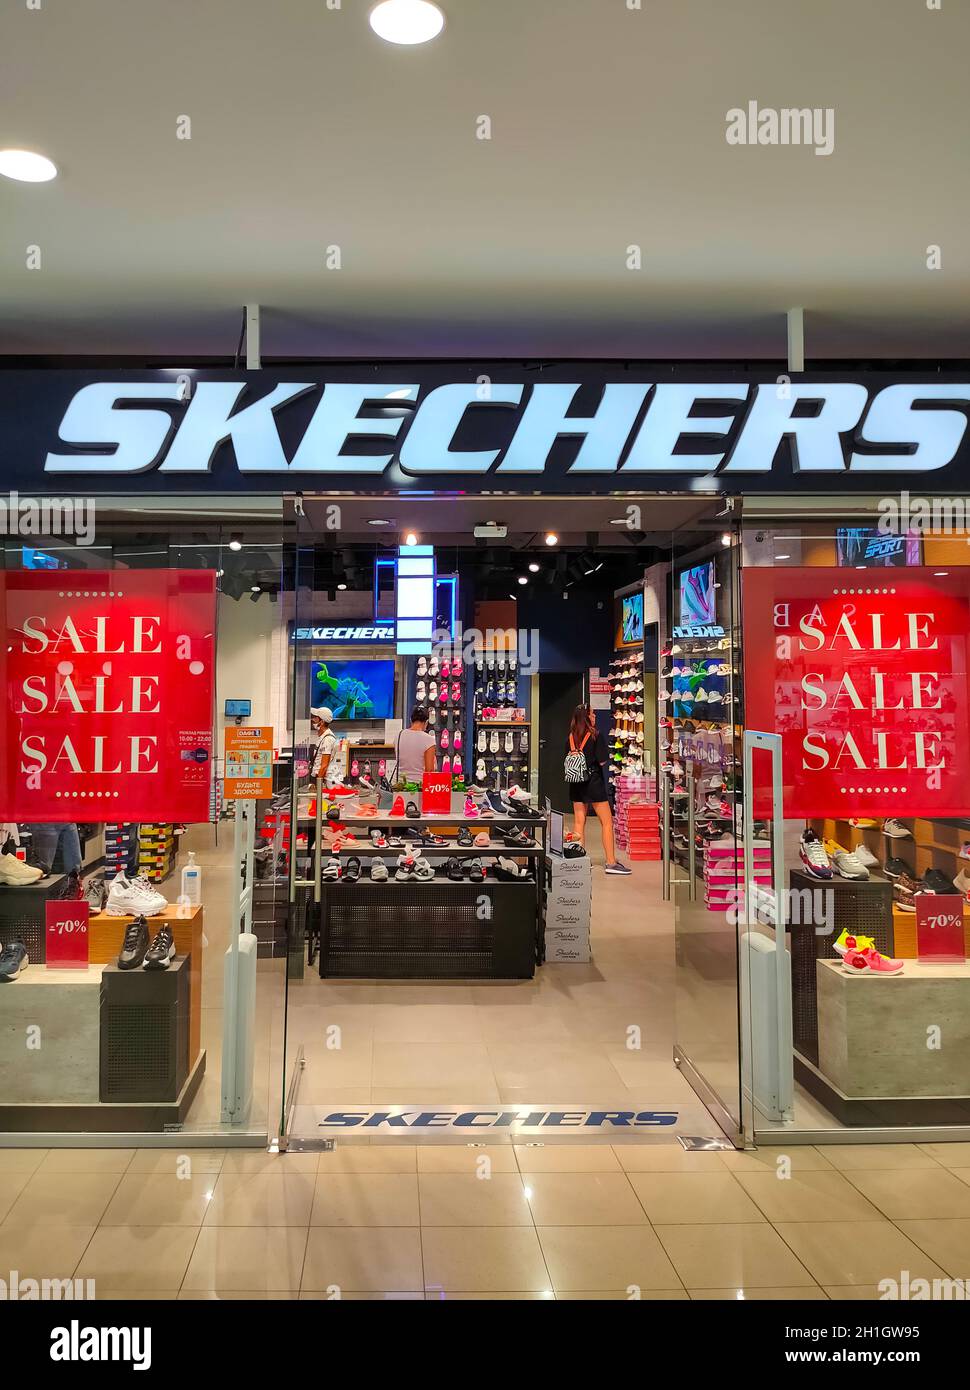 Kiyv, Ukraine - August 9, 2020: Sign of on the shop at Shopping Mall. Skechers is an American shoes company founded by CEO Robert Greenberg a Stock Photo - Alamy